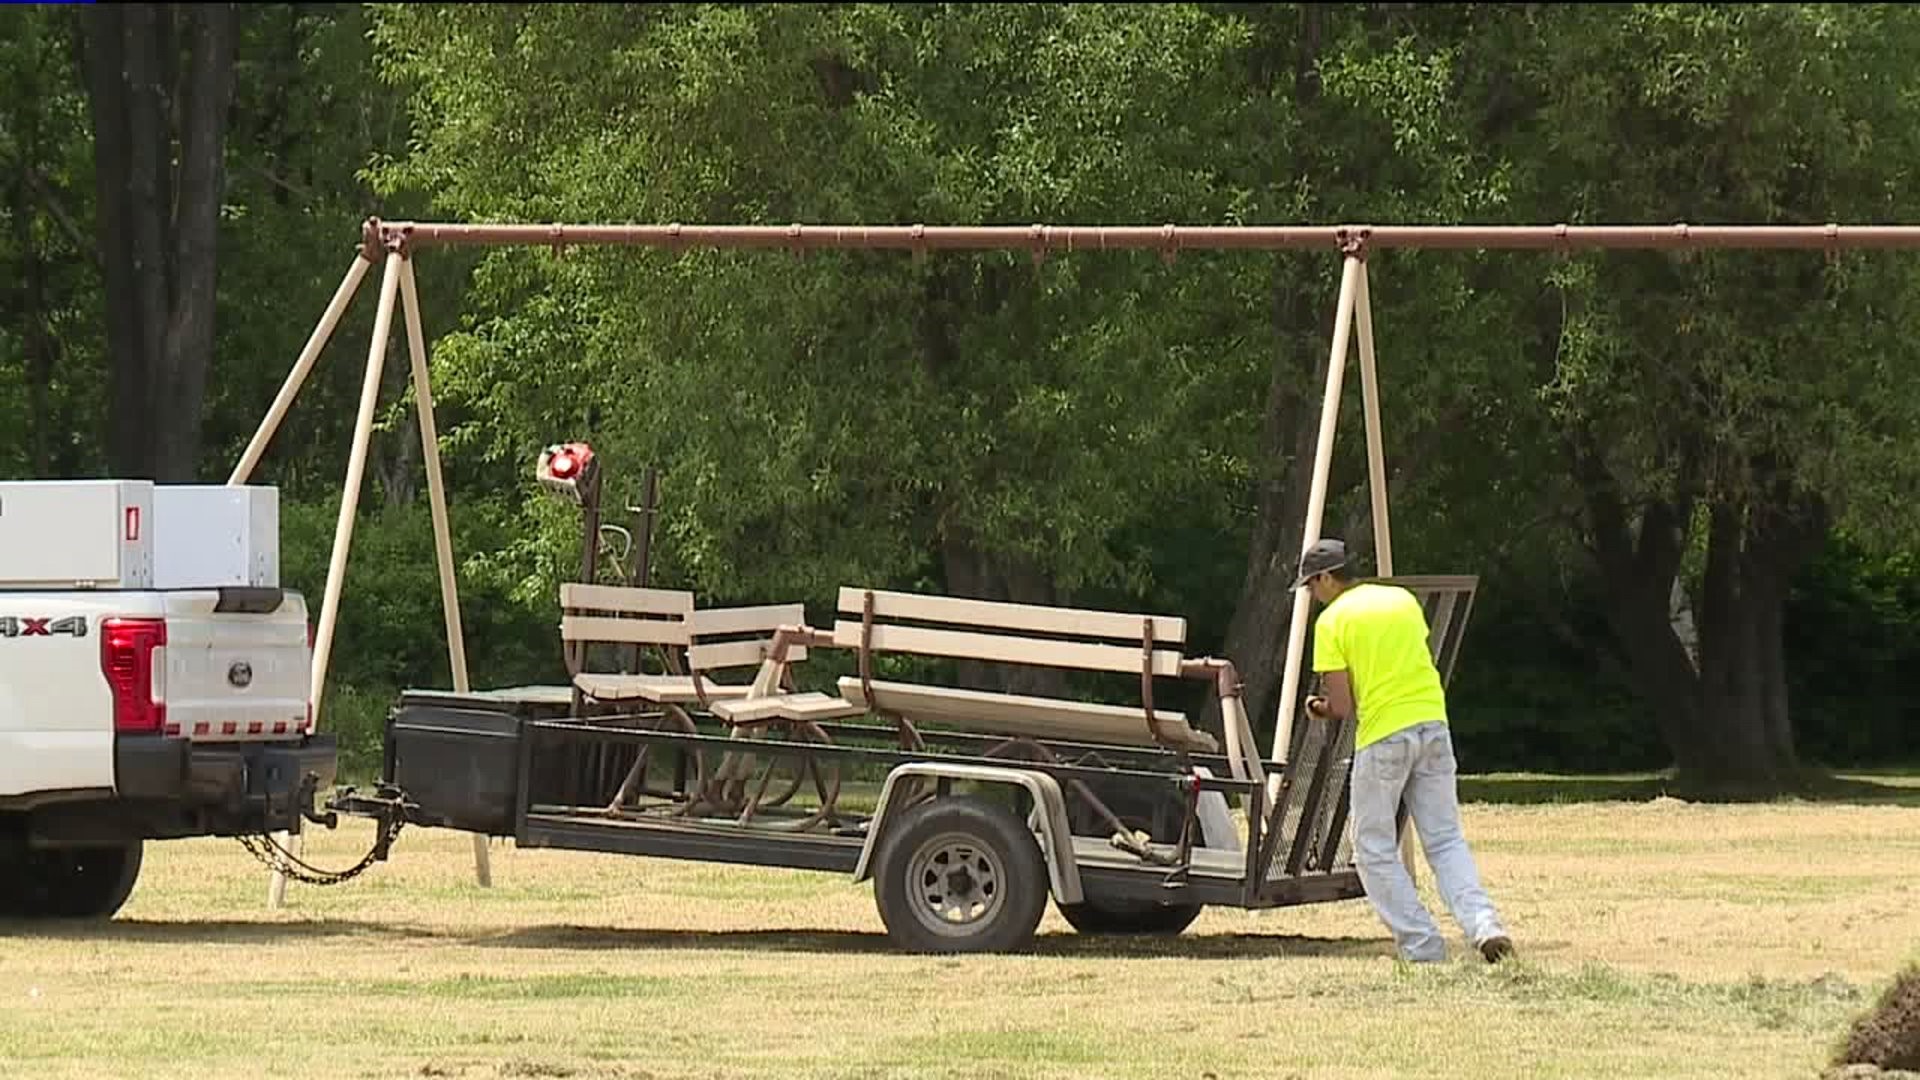 Equipment Removed from Disputed Playground